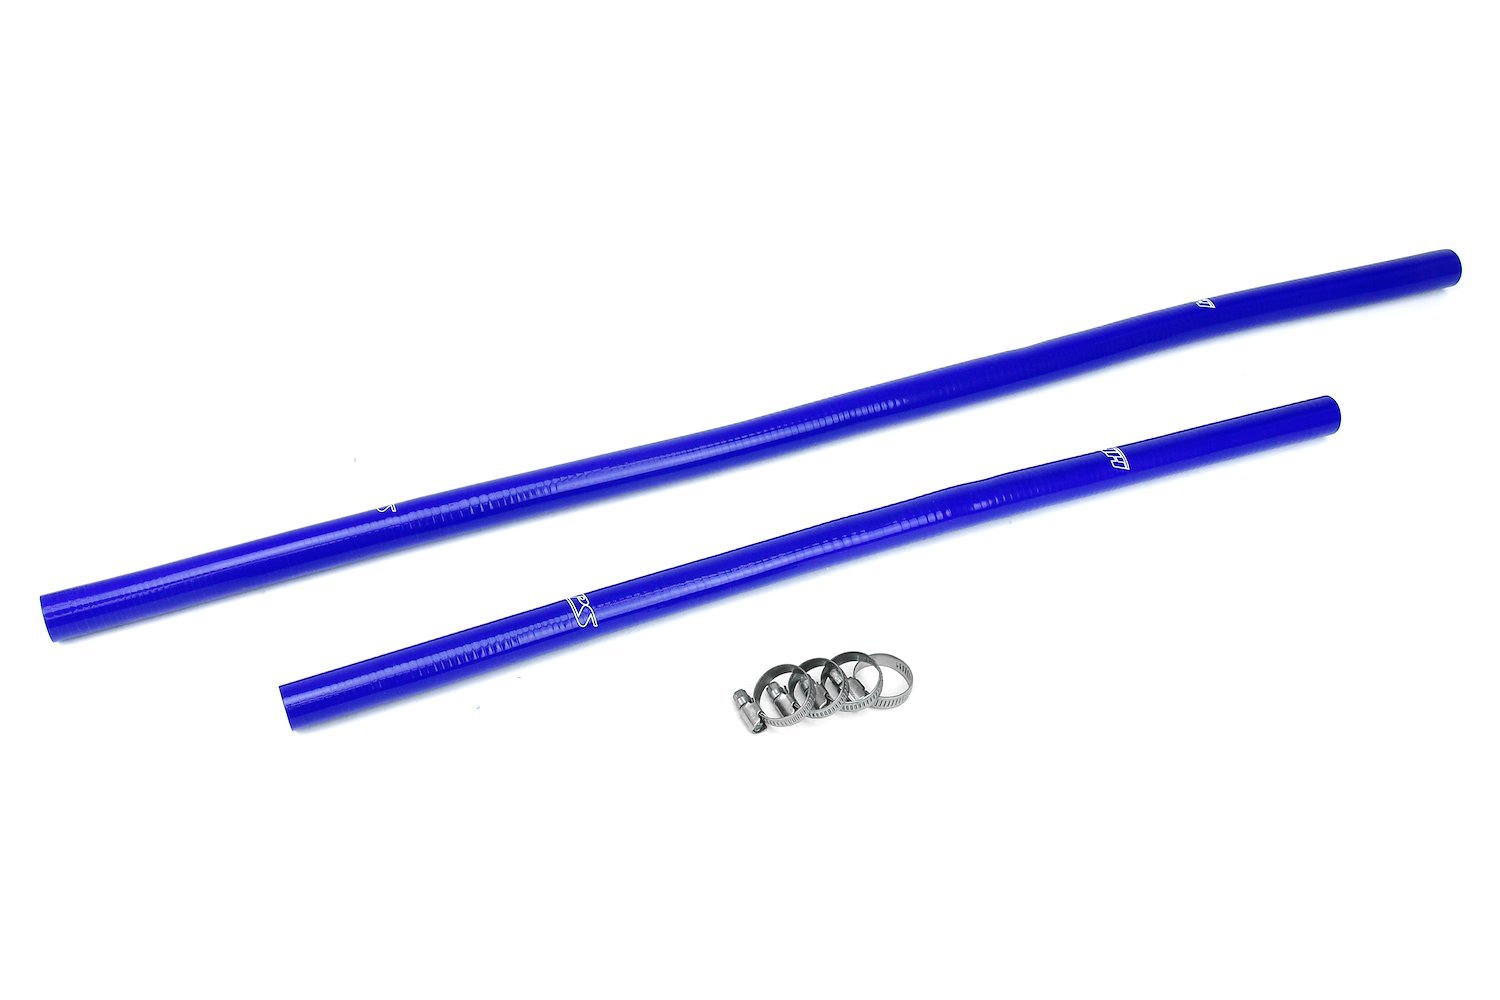 57-1910-BLUE Heater Hose Kit, 3-Ply Reinforced Silicone, Replaces OEM Rubber Heater Coolant Hoses